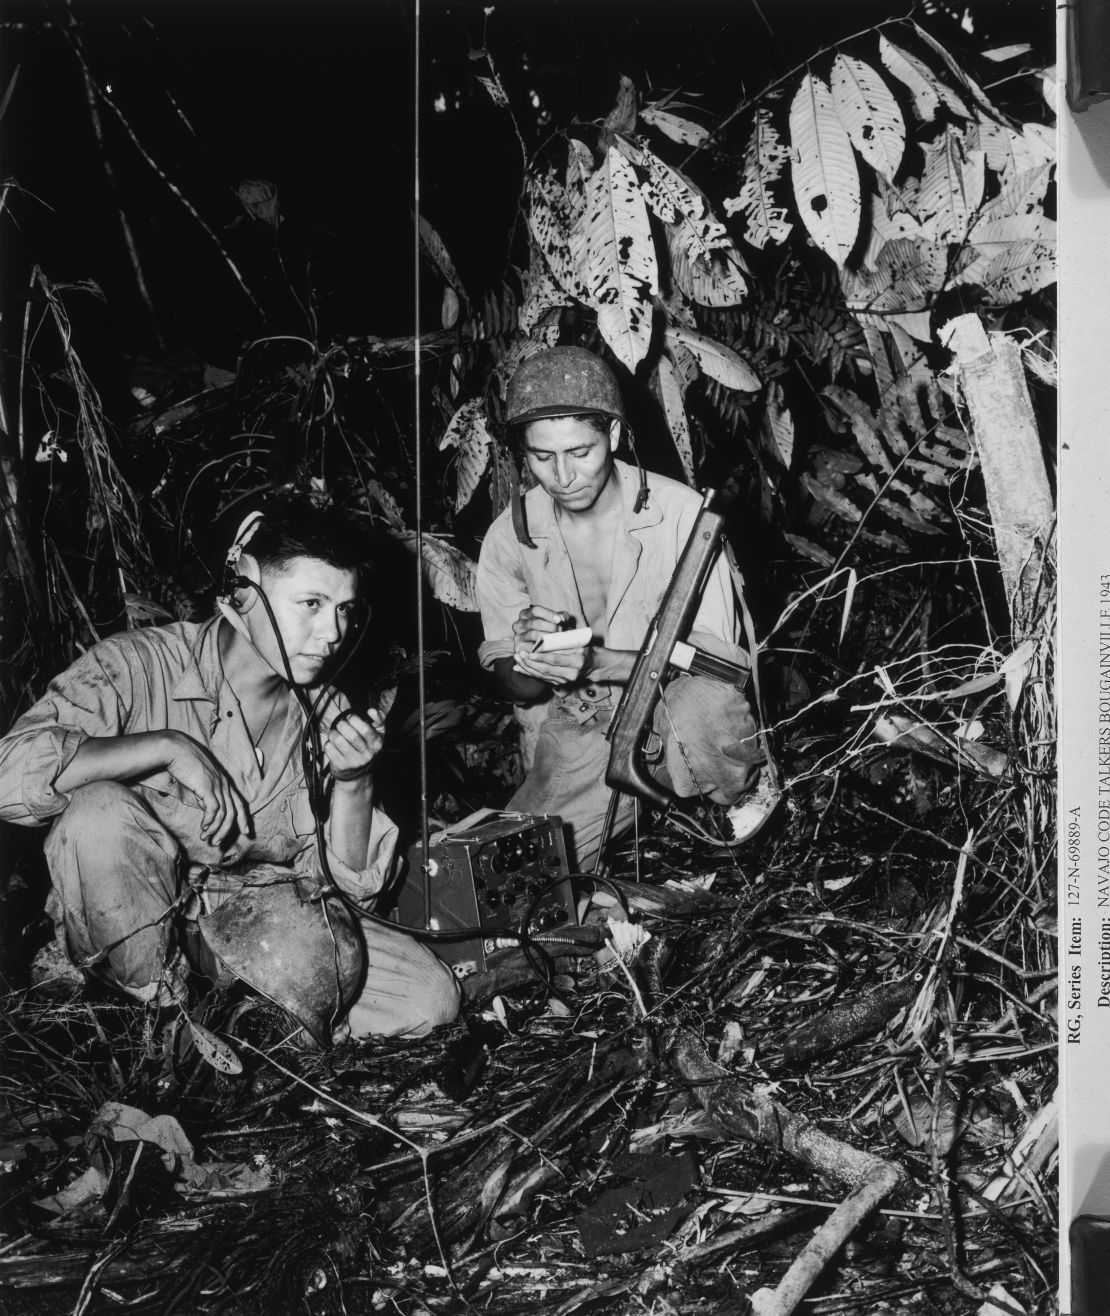 A photograph of Navajo Code Talkers, Cpl Henry Bake, Jr. and PFC George H. Kirk in Bougainville, circa 1943.